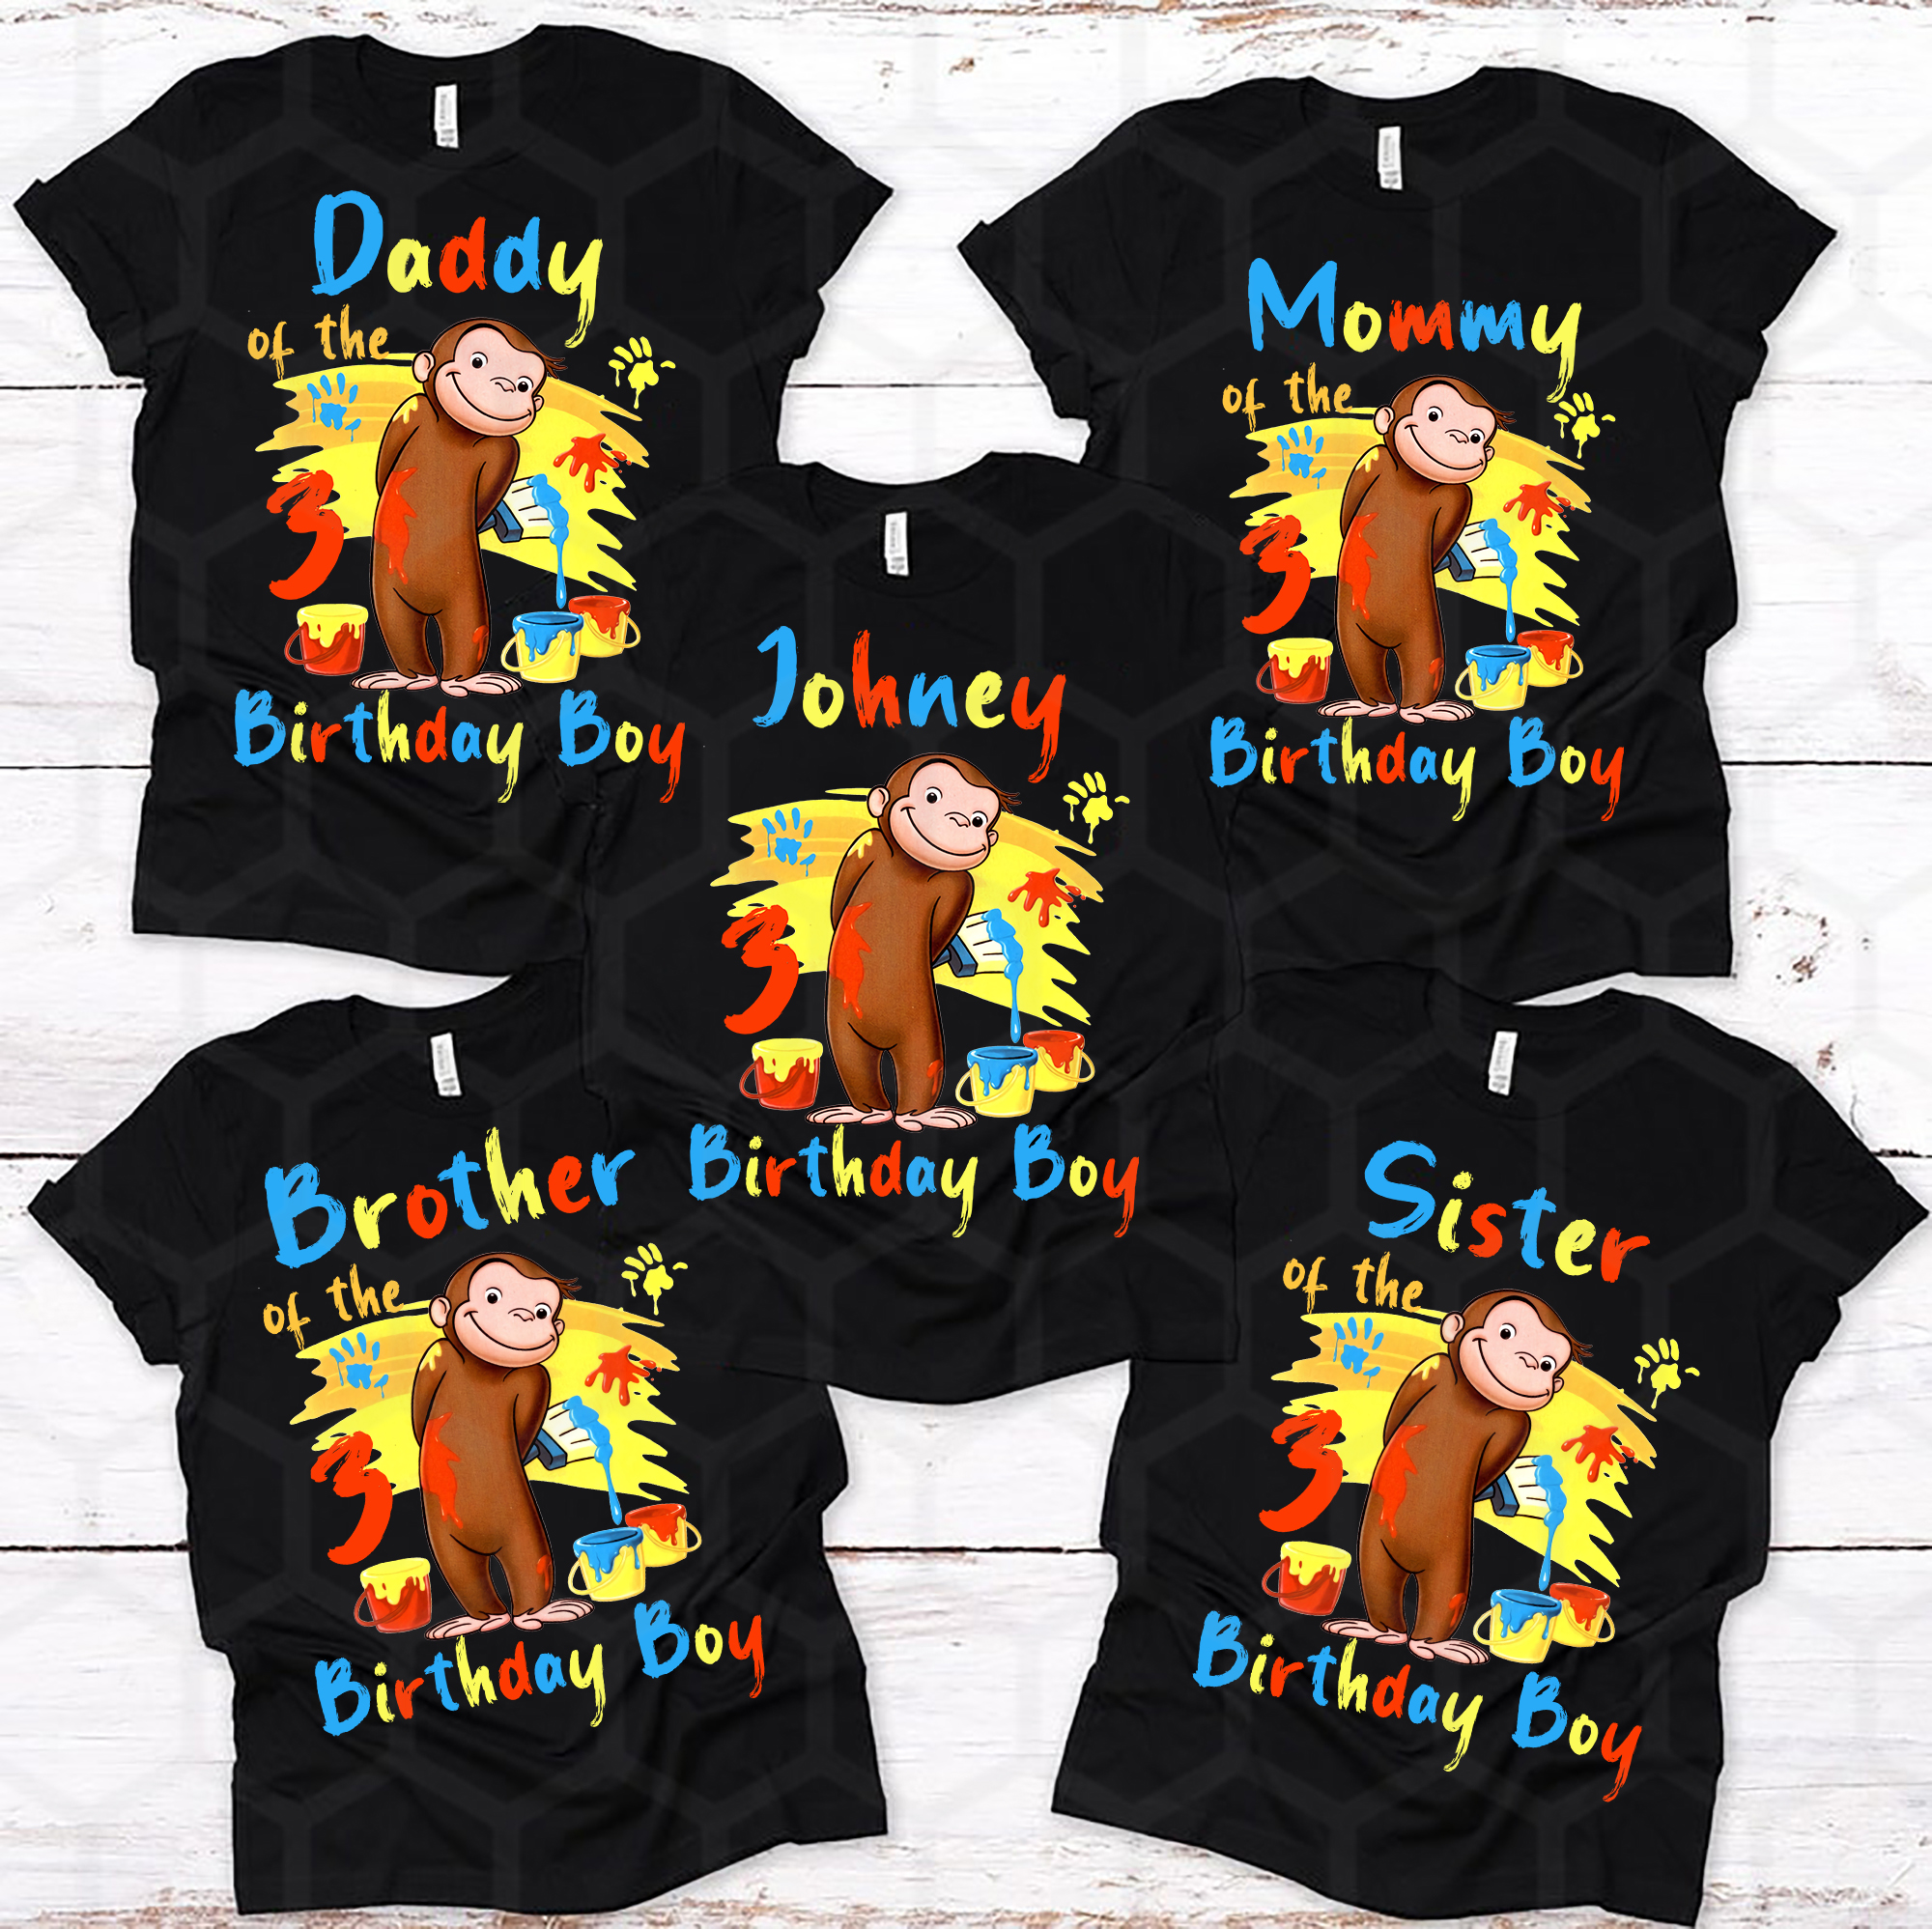 Custom Curious George Shirt, Curious George Birthday Party Shirt, Curious George Family Matching Shirt Set, Curious George Shirt